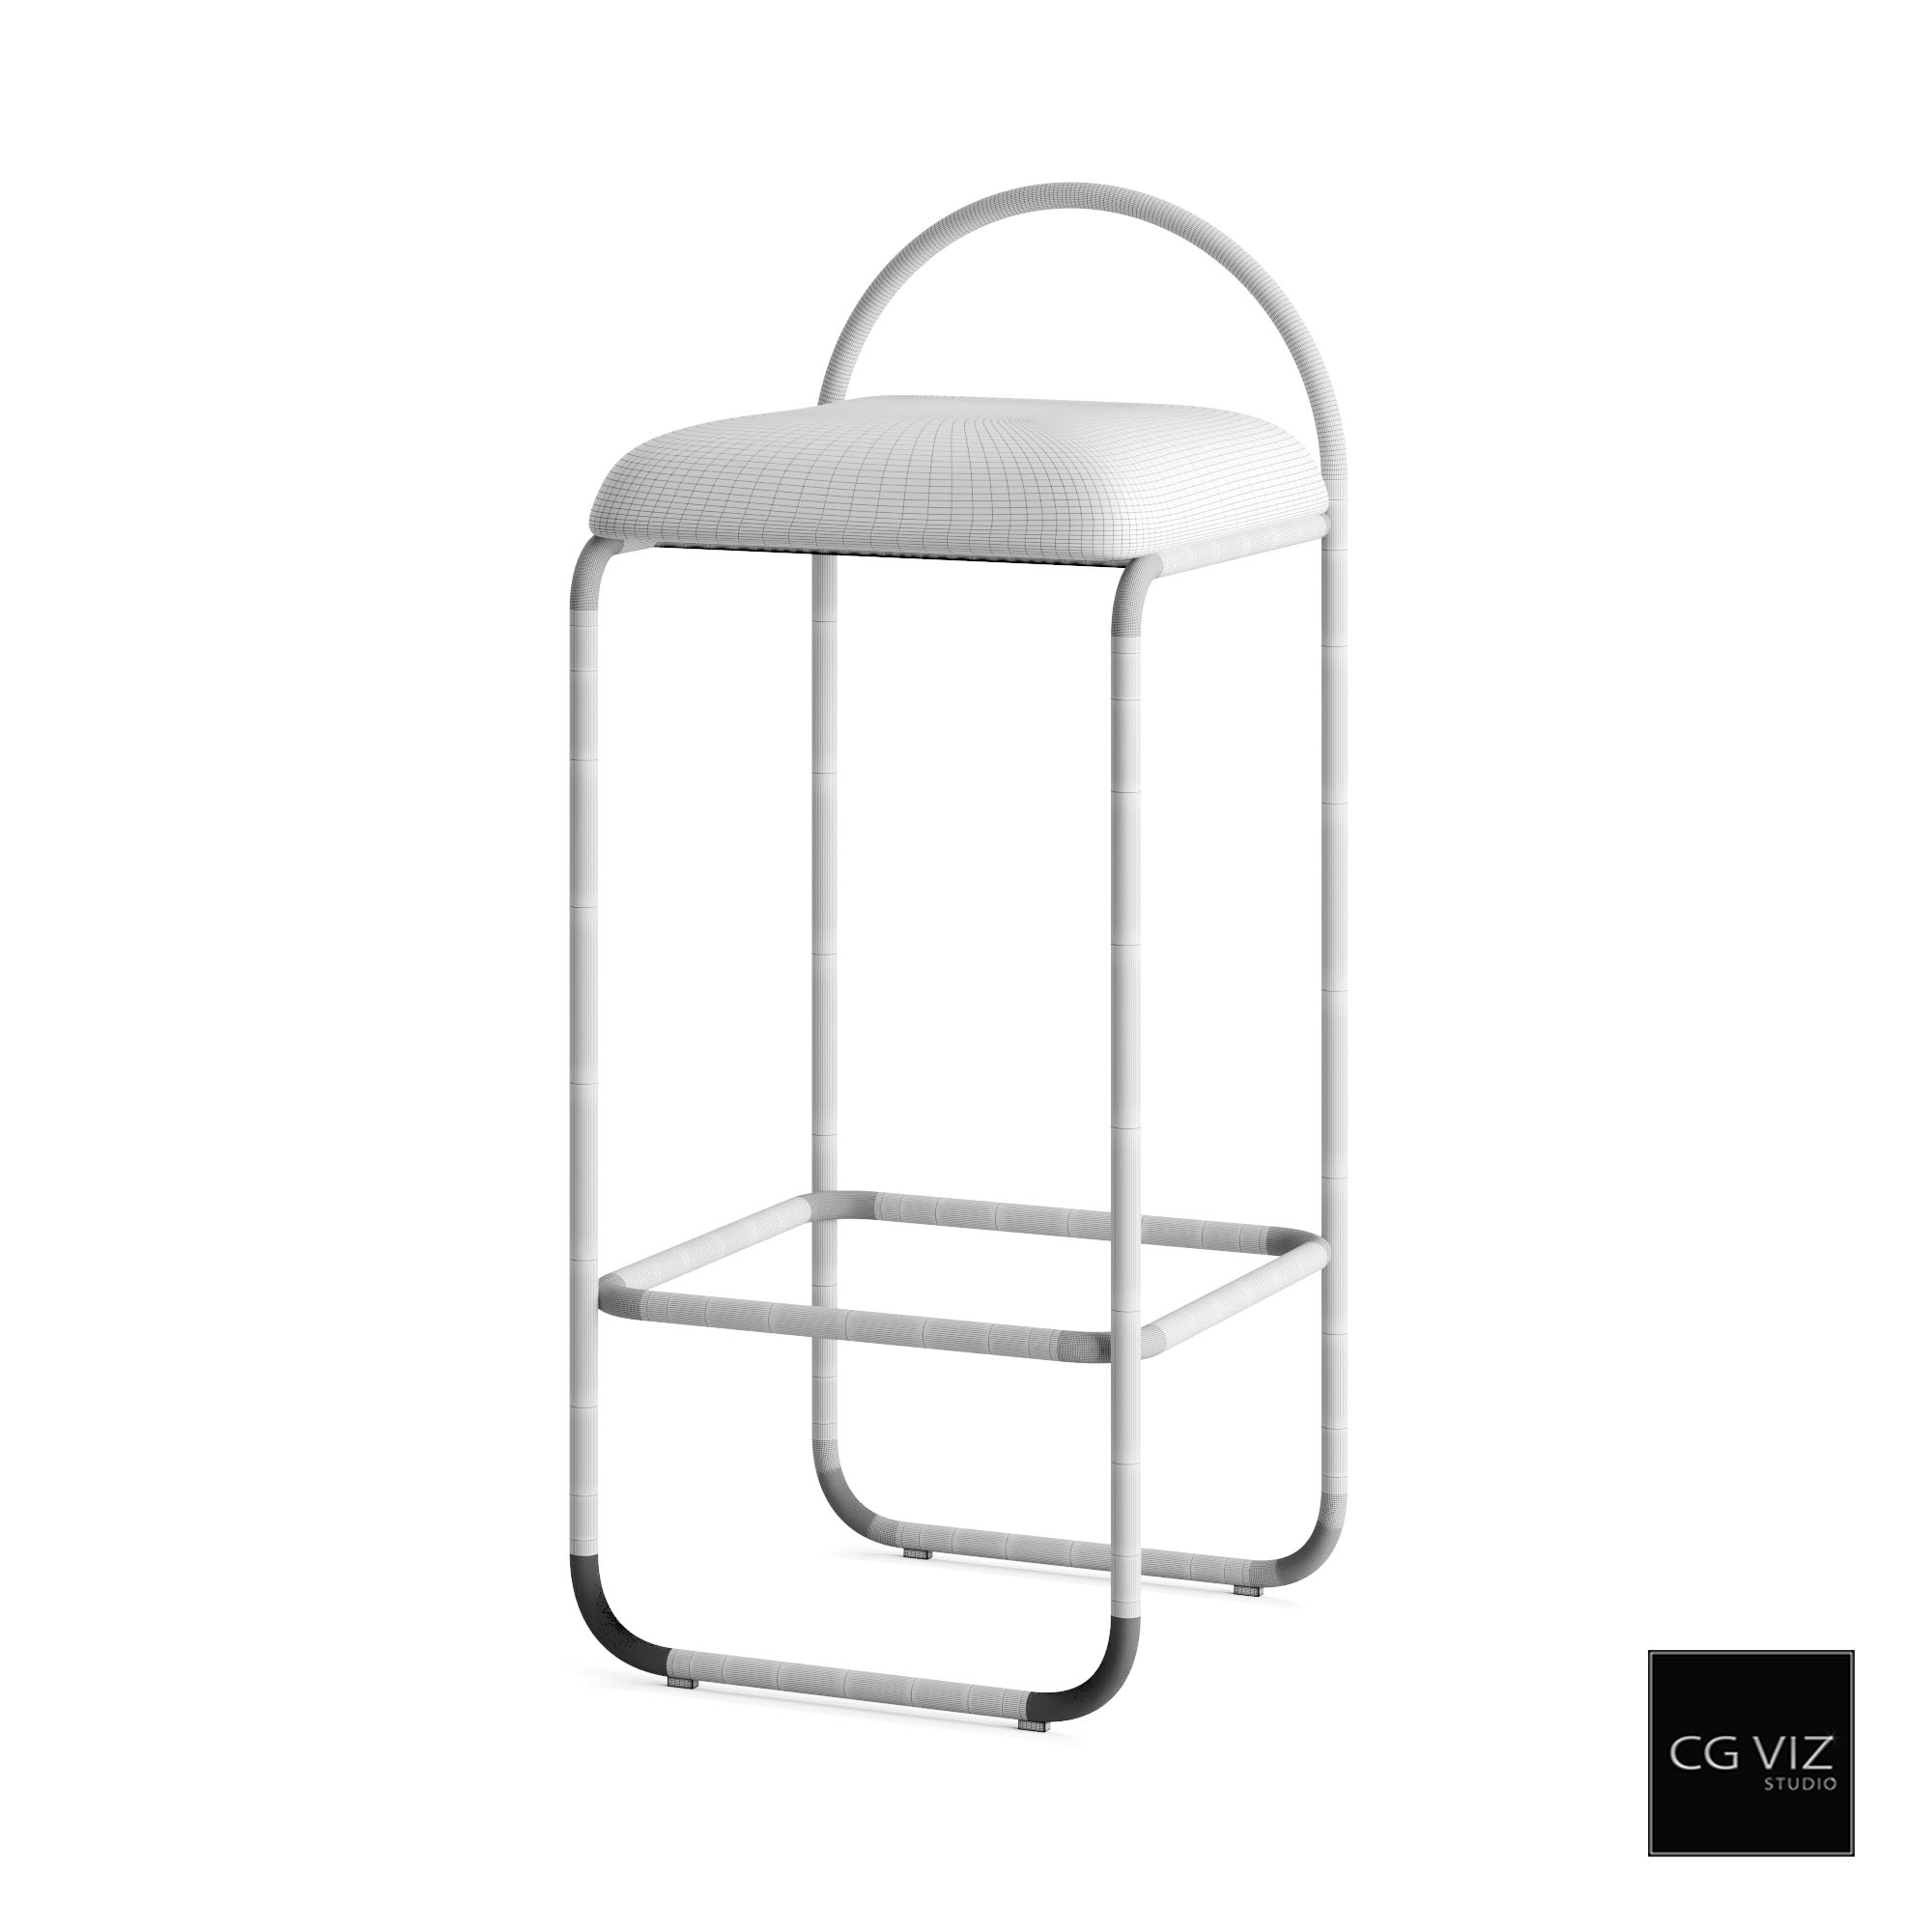 Wireframe View of ANGUI Bar Chair Rose 3D Model by CG Viz Studio